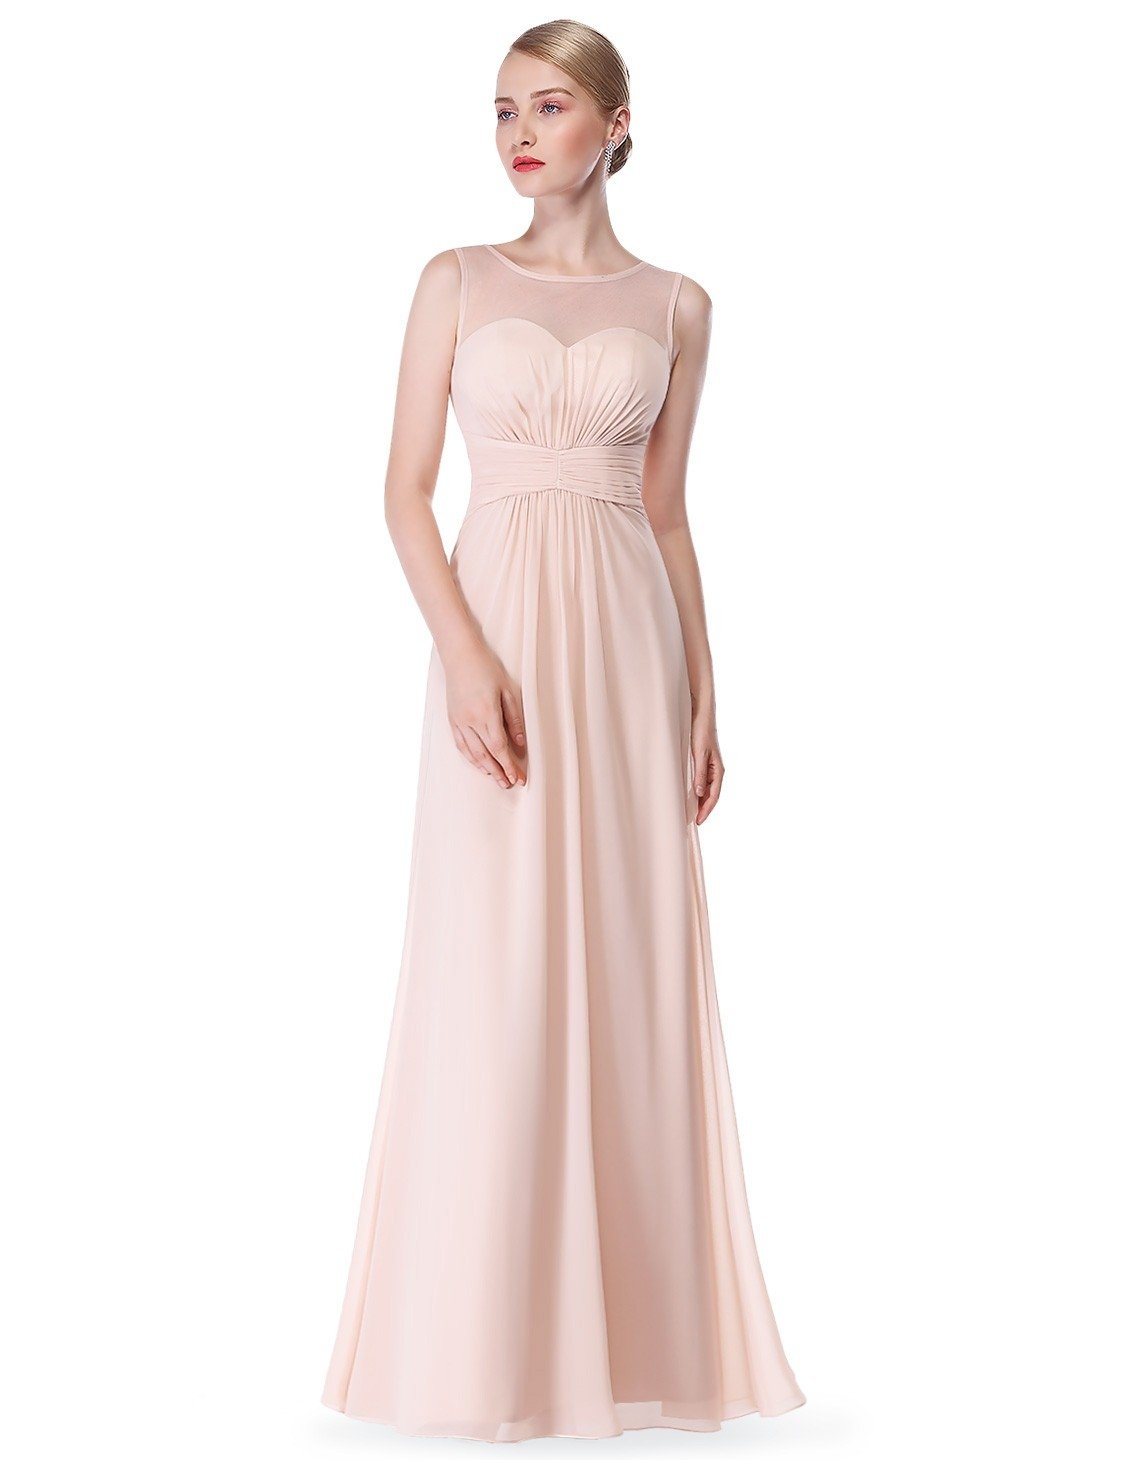 Our Cheapest (and Chicest) Bridesmaid Dresses - Ever-Pretty US